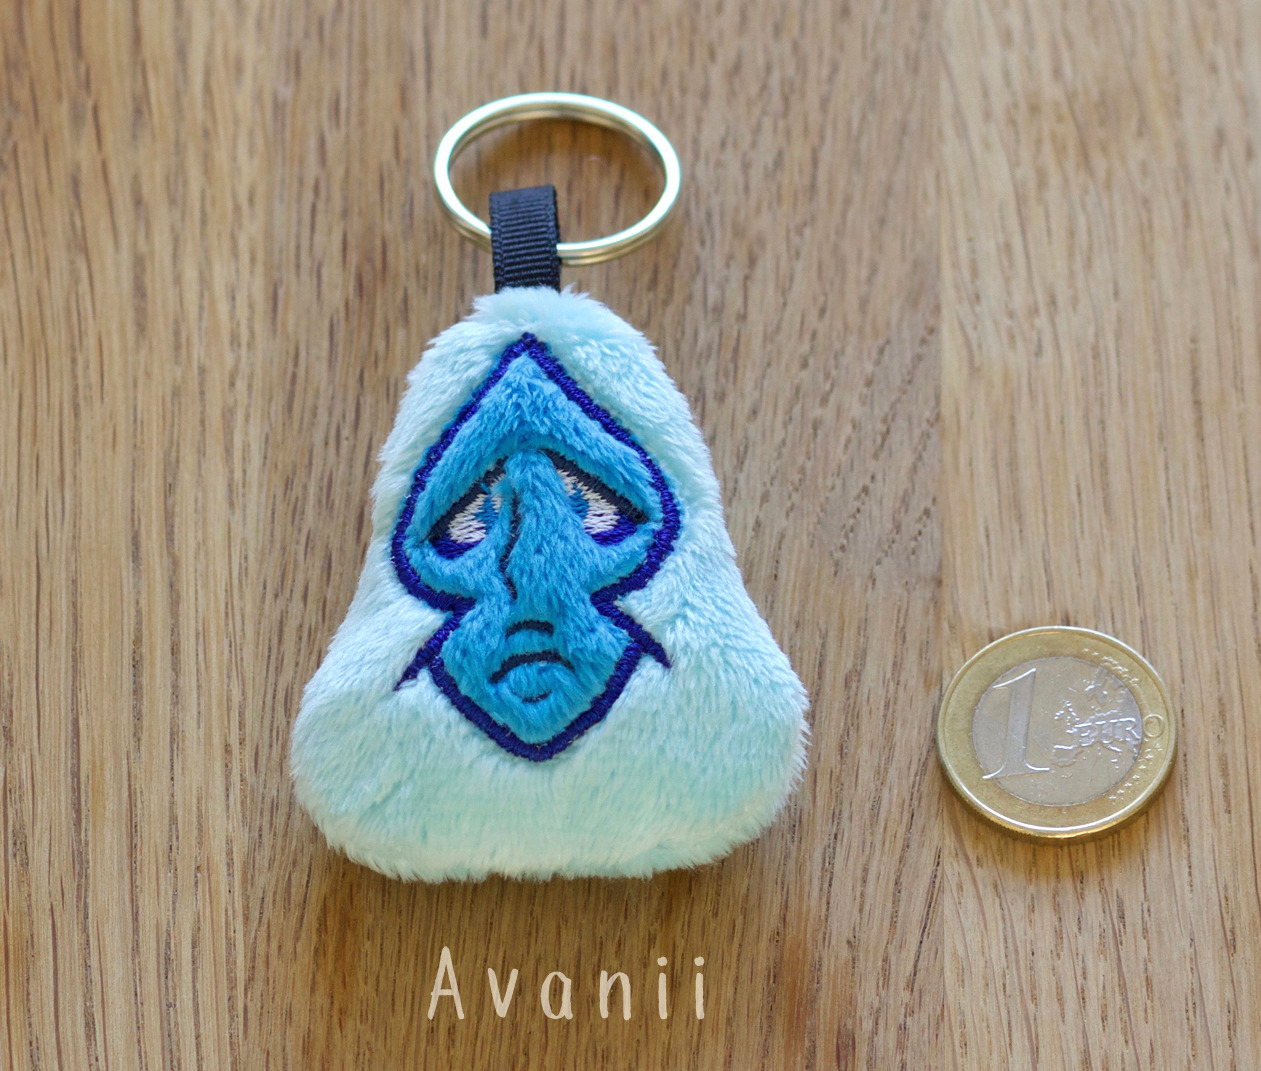 Steven Universe-themed soft charms are now available in my Etsy shop! :D https://www.etsy.com/shop/AvaniiPlush?section_id=22831680 Each charm is made of soft minky and features machine embroidered...